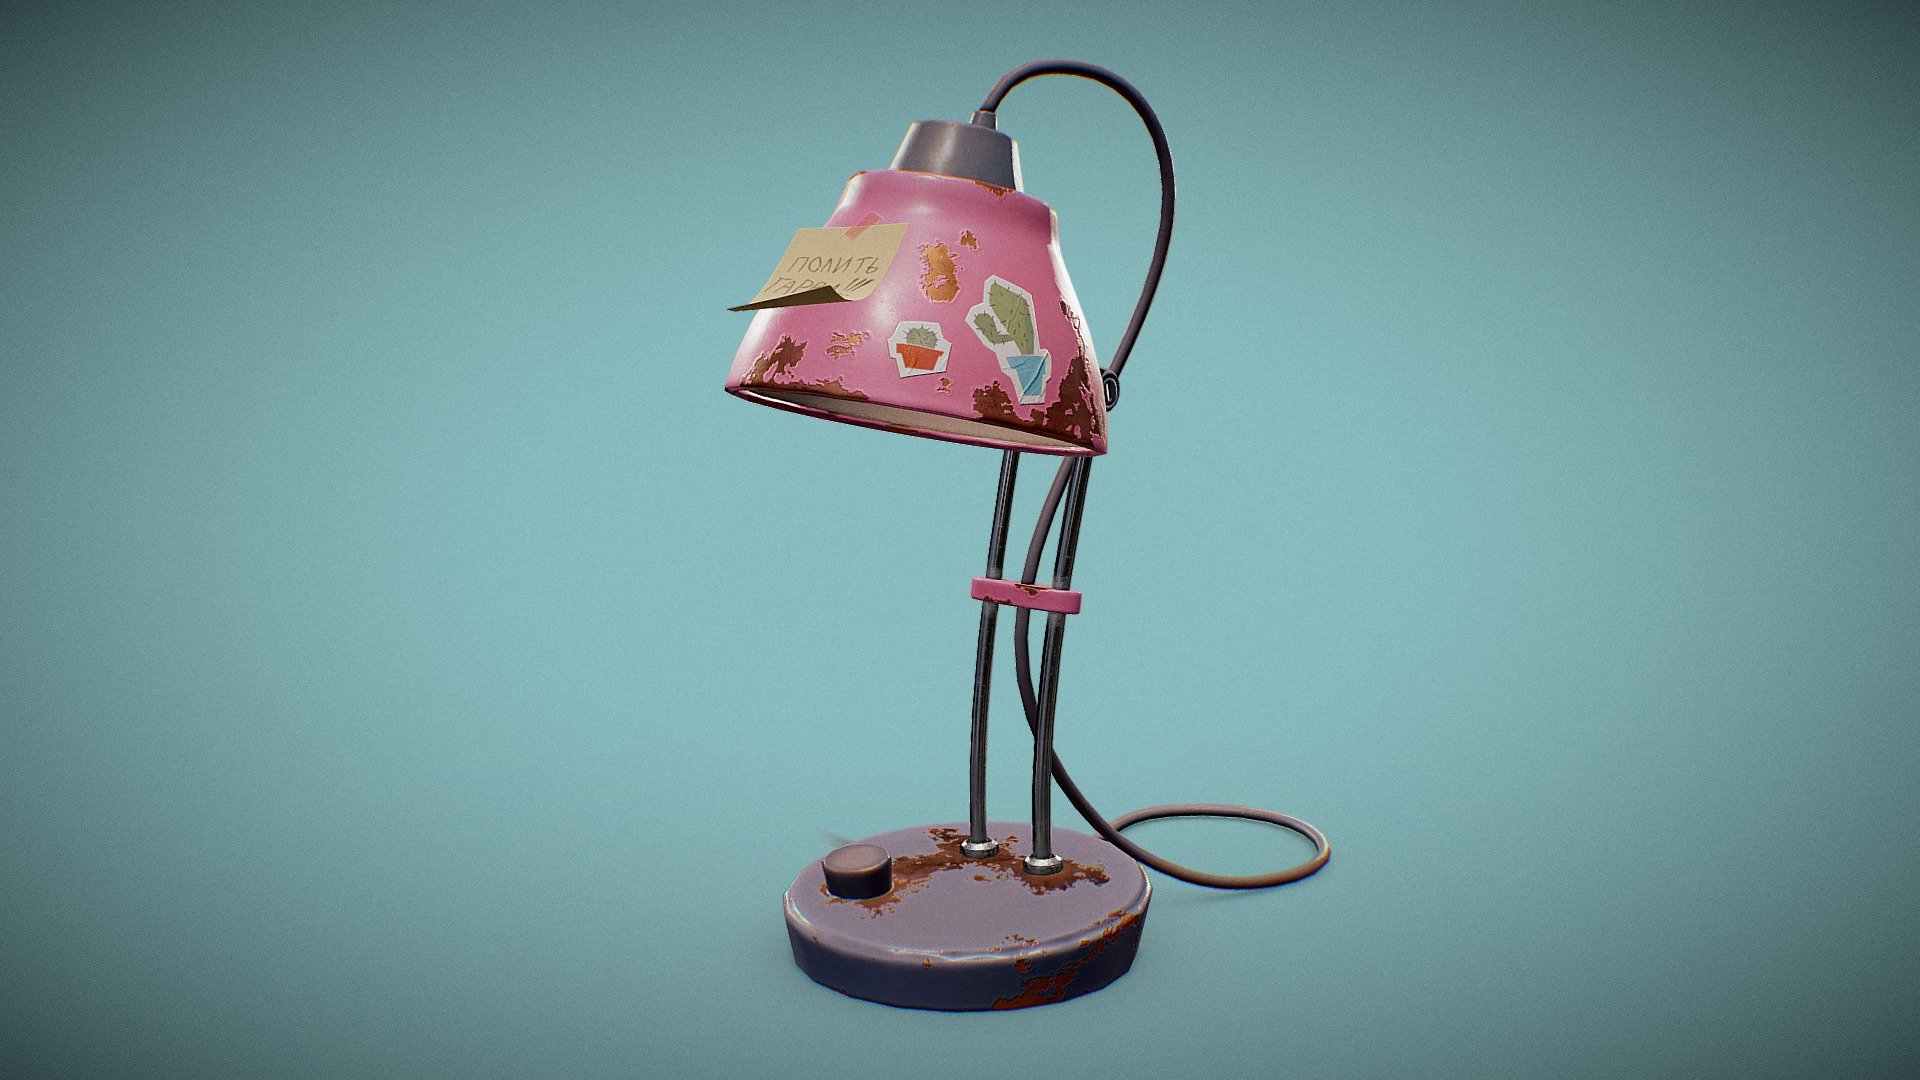 Table Lamp Game ready asset
Hello! This time I wanted to show this yummy lamp.
SEE THIS MODEL ON ARTSTATION

I used 3ds Max for modeling, RizomUV for UV, Marmoset Toolbag for baking and rendering, texturing in Substance Painter, editing in Photoshop.

Work-In-Progress video https://youtu.be/sp20Vggfum0

Original concept by VeryBusyBunny


P.S.: 1 texture set, 1289 Tris without cable
Thanx - Table Lamp - 3D model by Maria Savelyeva (@erinsavel) 3d model